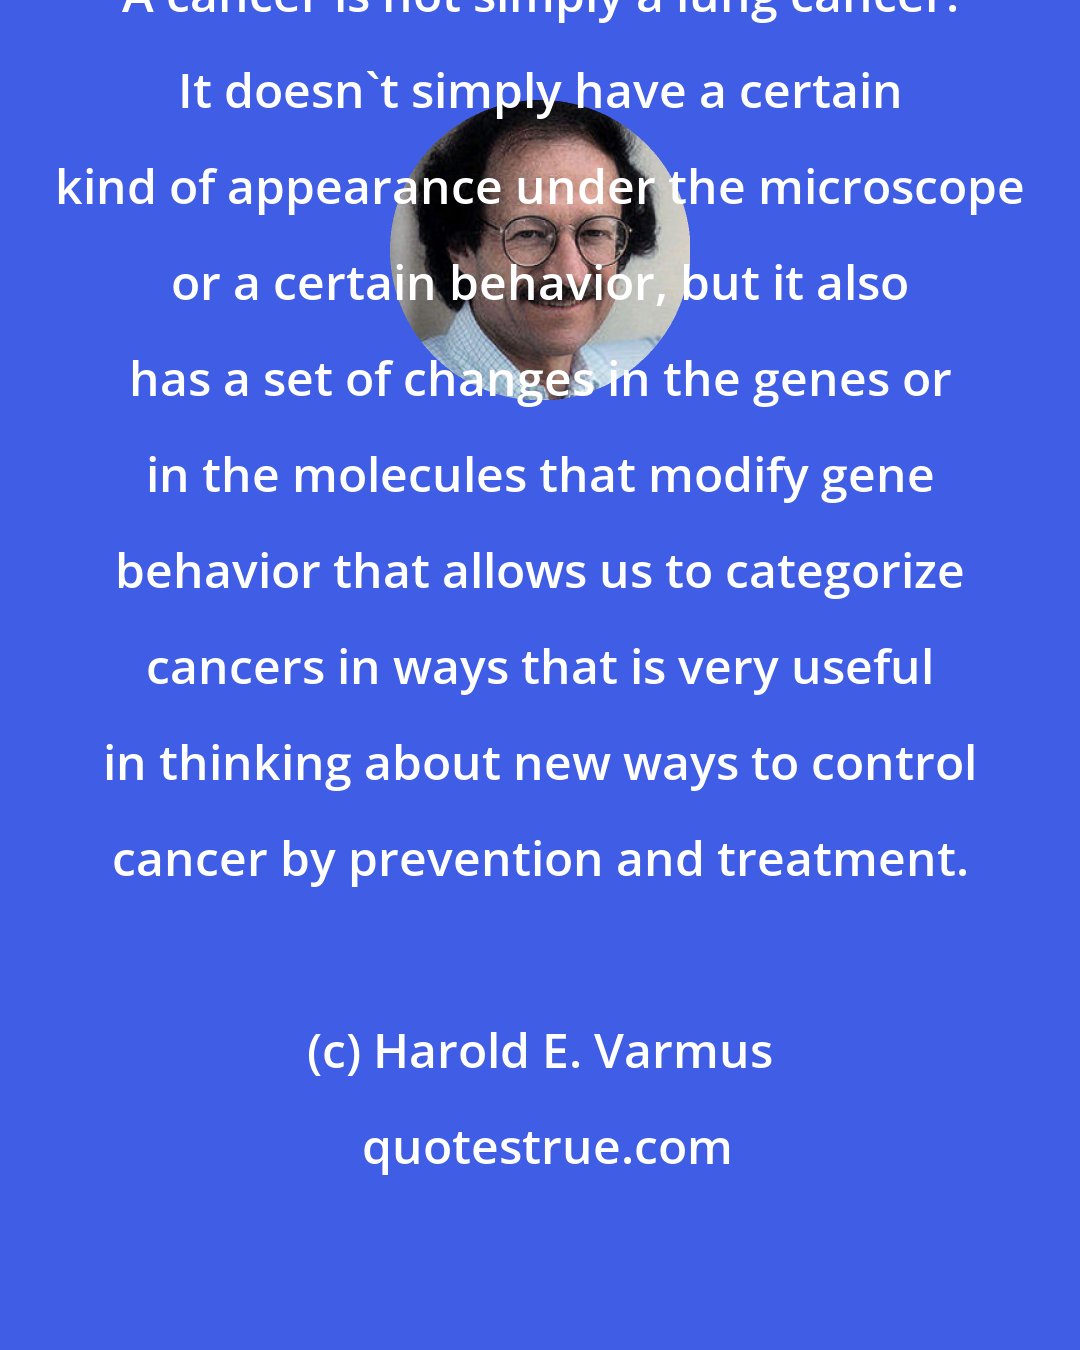 Harold E. Varmus: A cancer is not simply a lung cancer. It doesn't simply have a certain kind of appearance under the microscope or a certain behavior, but it also has a set of changes in the genes or in the molecules that modify gene behavior that allows us to categorize cancers in ways that is very useful in thinking about new ways to control cancer by prevention and treatment.